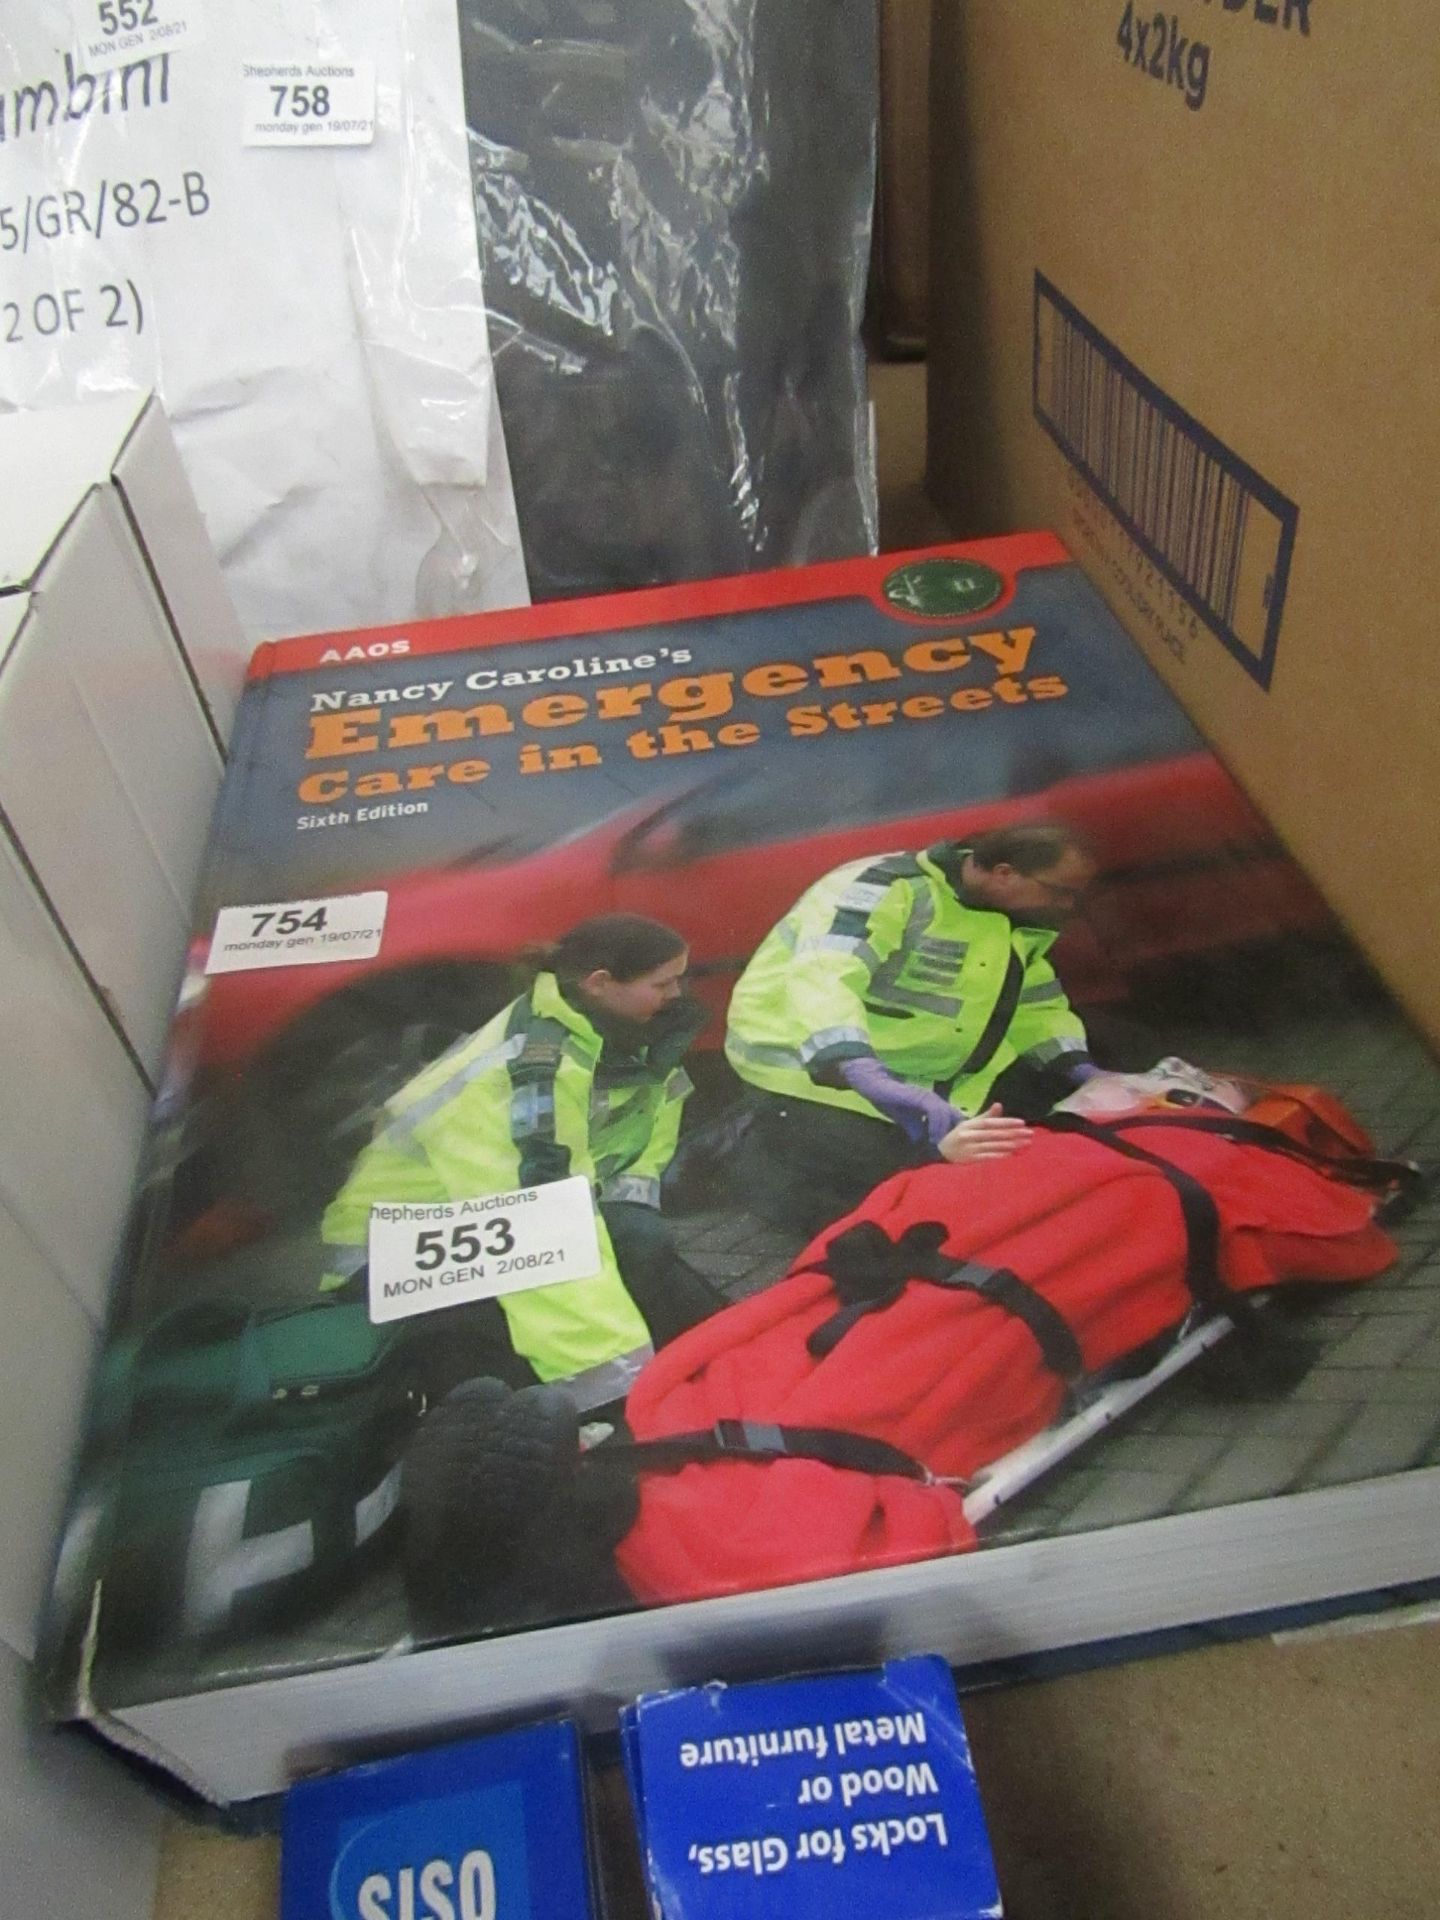 Nancy Caroline's - Emergency Care In The Street Sixth Edition - Used Condition, No Packaging.